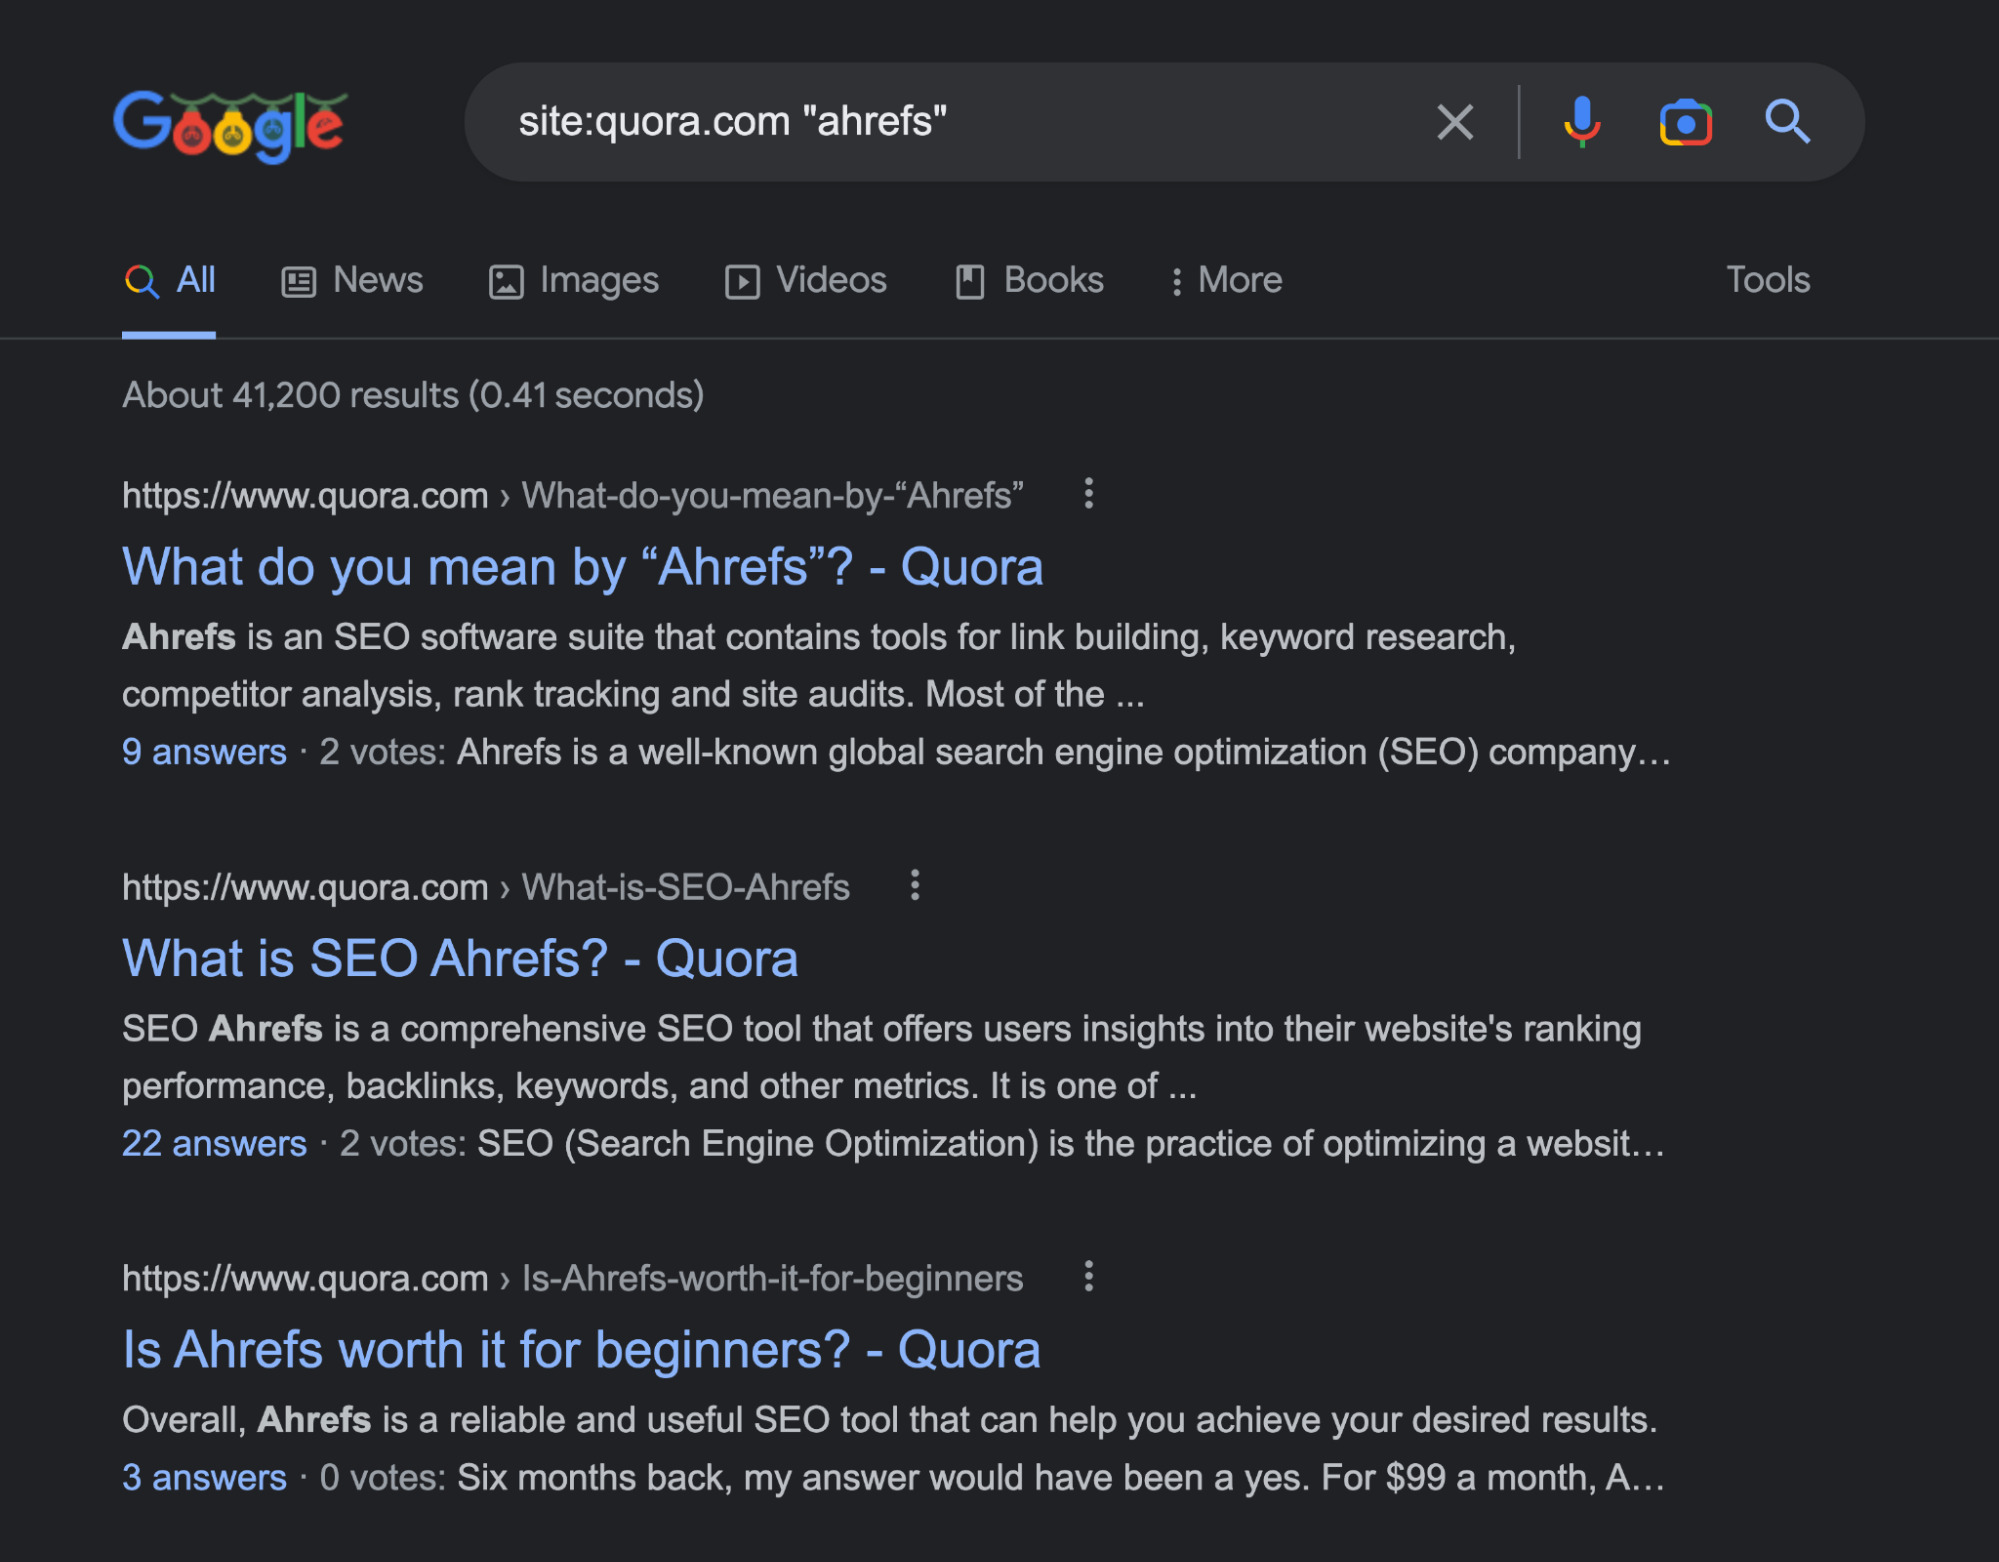 Using Google search operators to find brand and product mentions on Quora
 